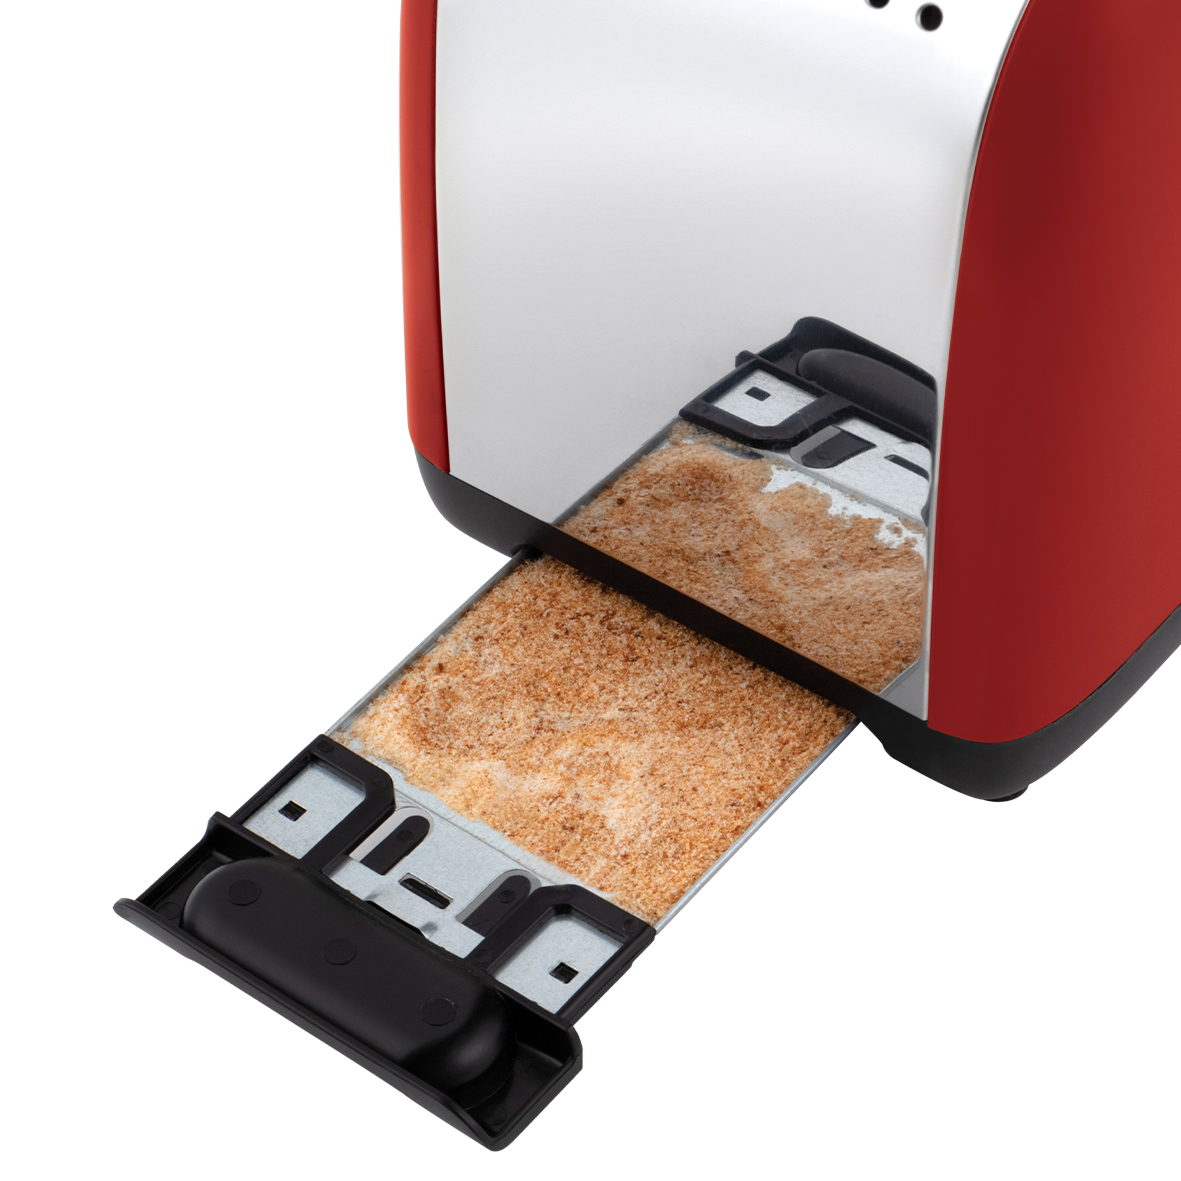 Russell Hobbs_Colours Plus Toaster_Flame Red_59,99 Euro (7)